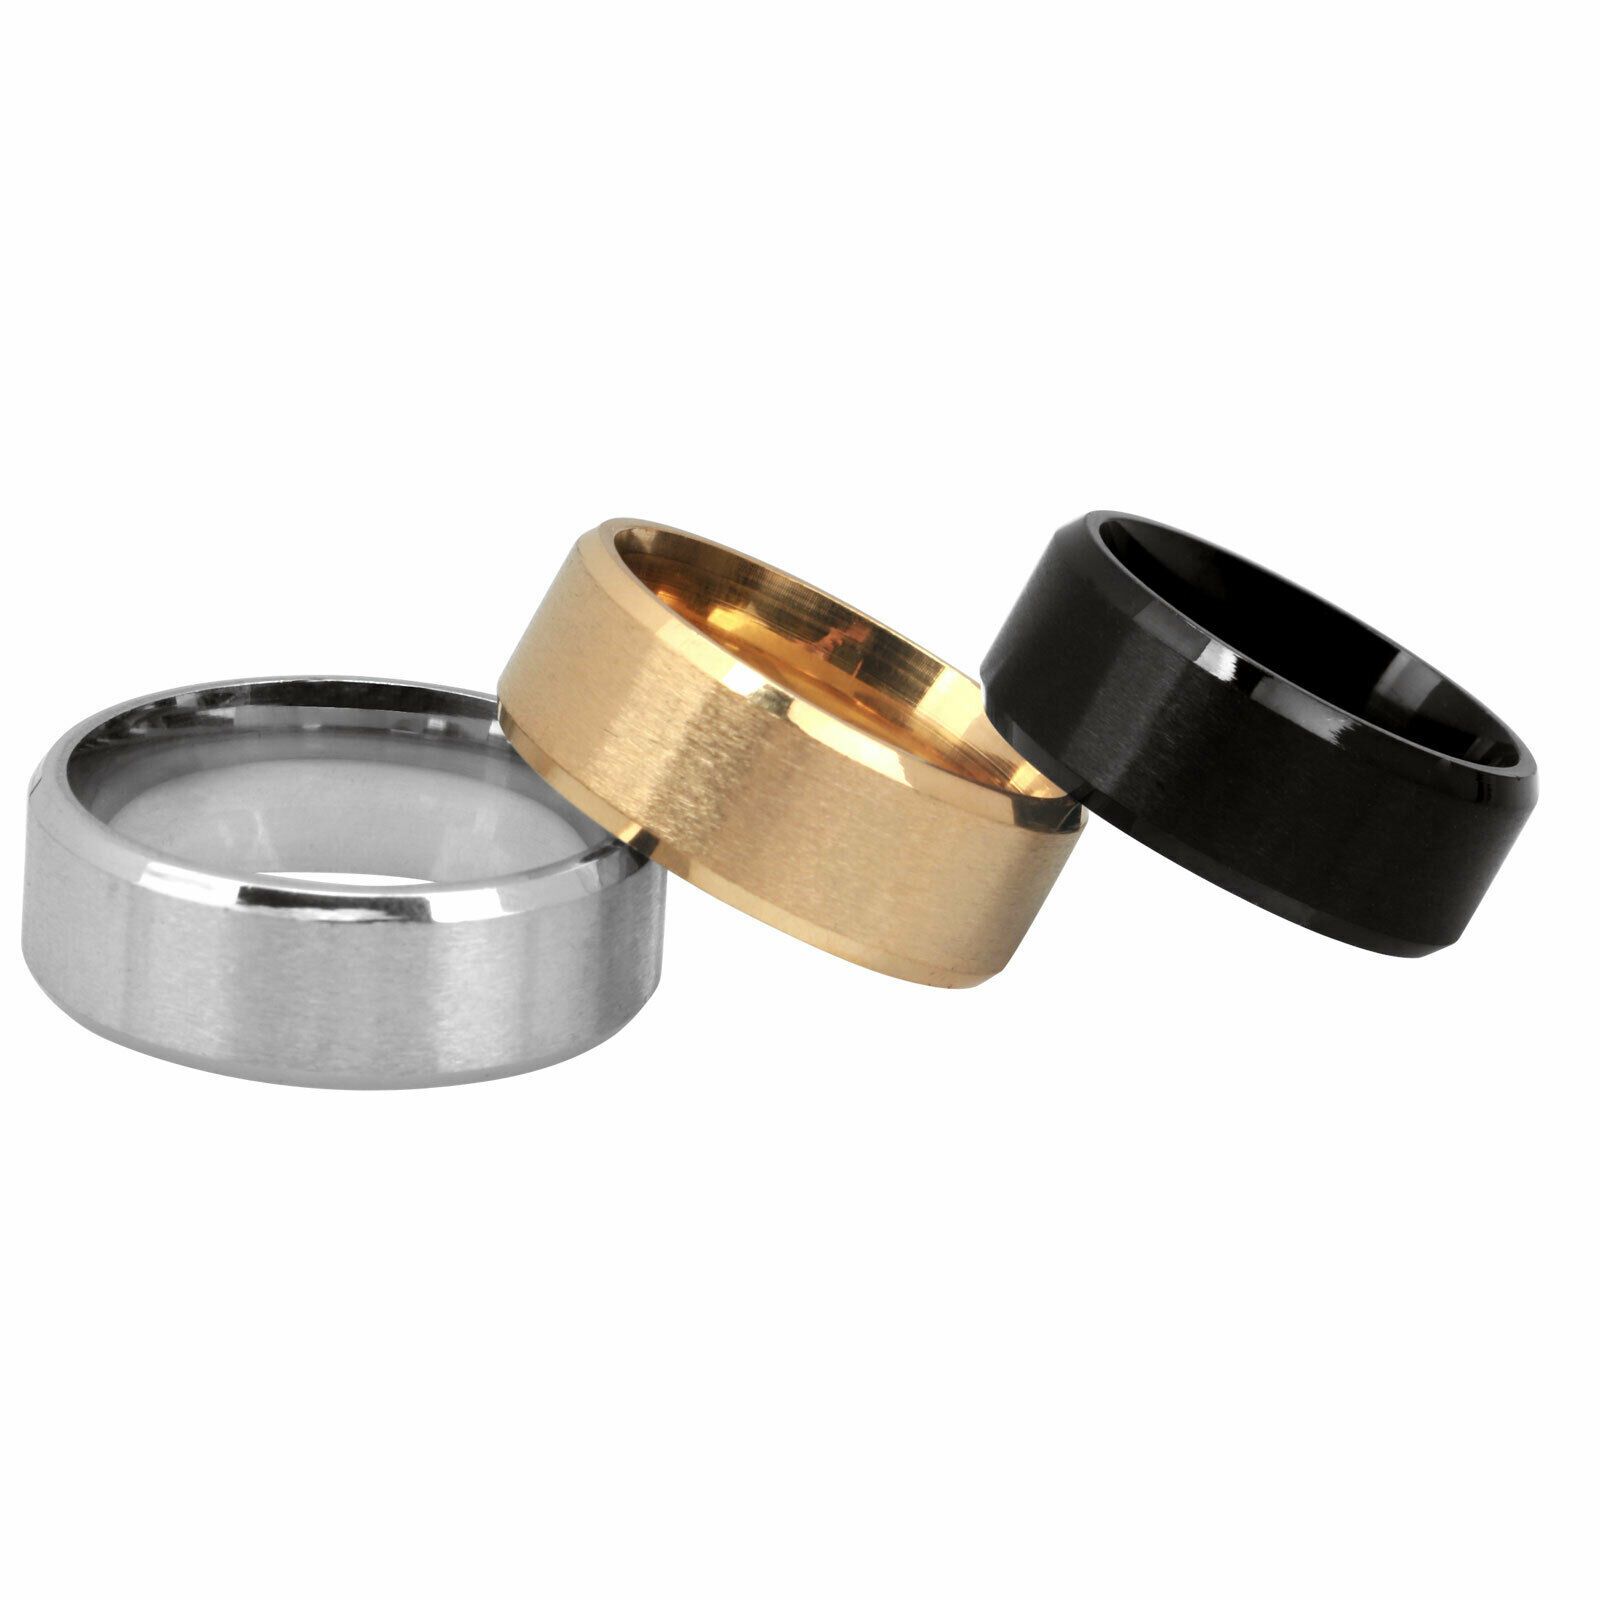 Duality (Magma Flow) Men's Titanium and Acrylic Wedding Band – Richter  Scale Rings